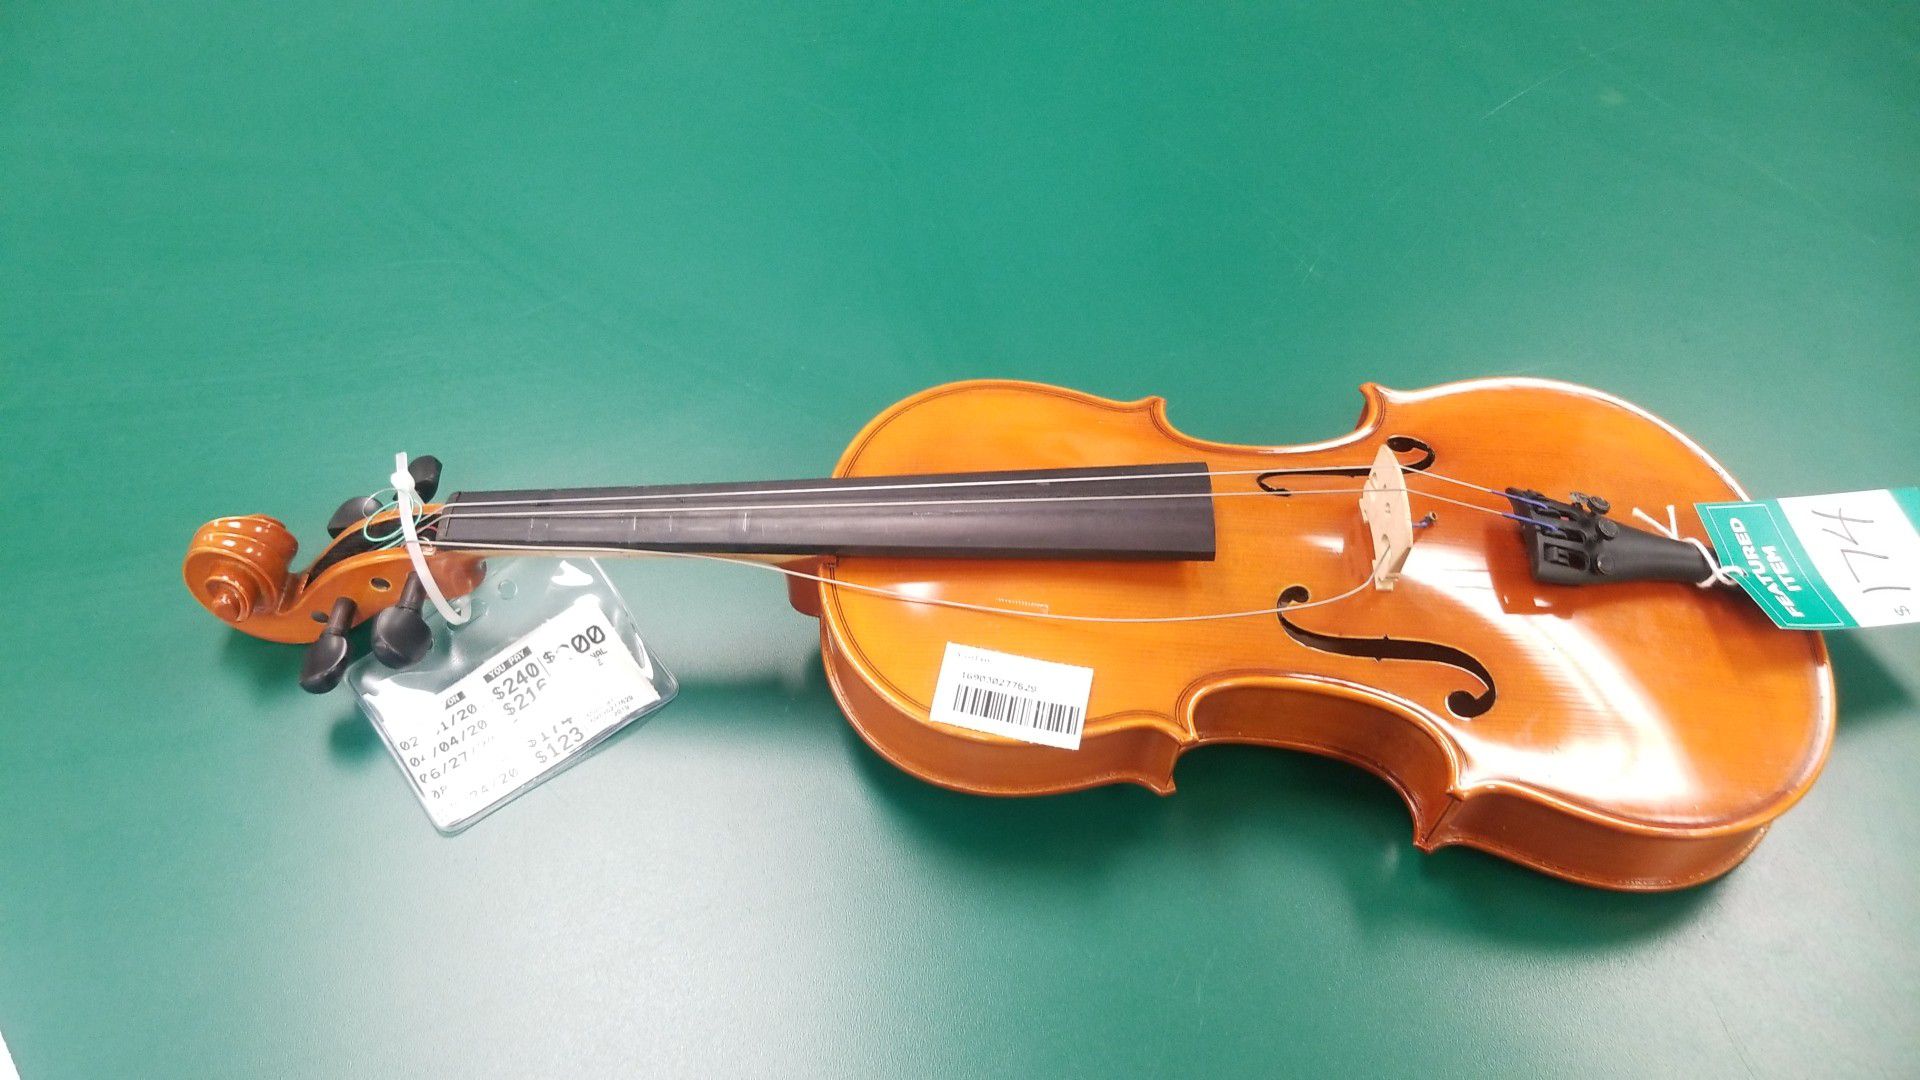 Strobel Violin with carrying case